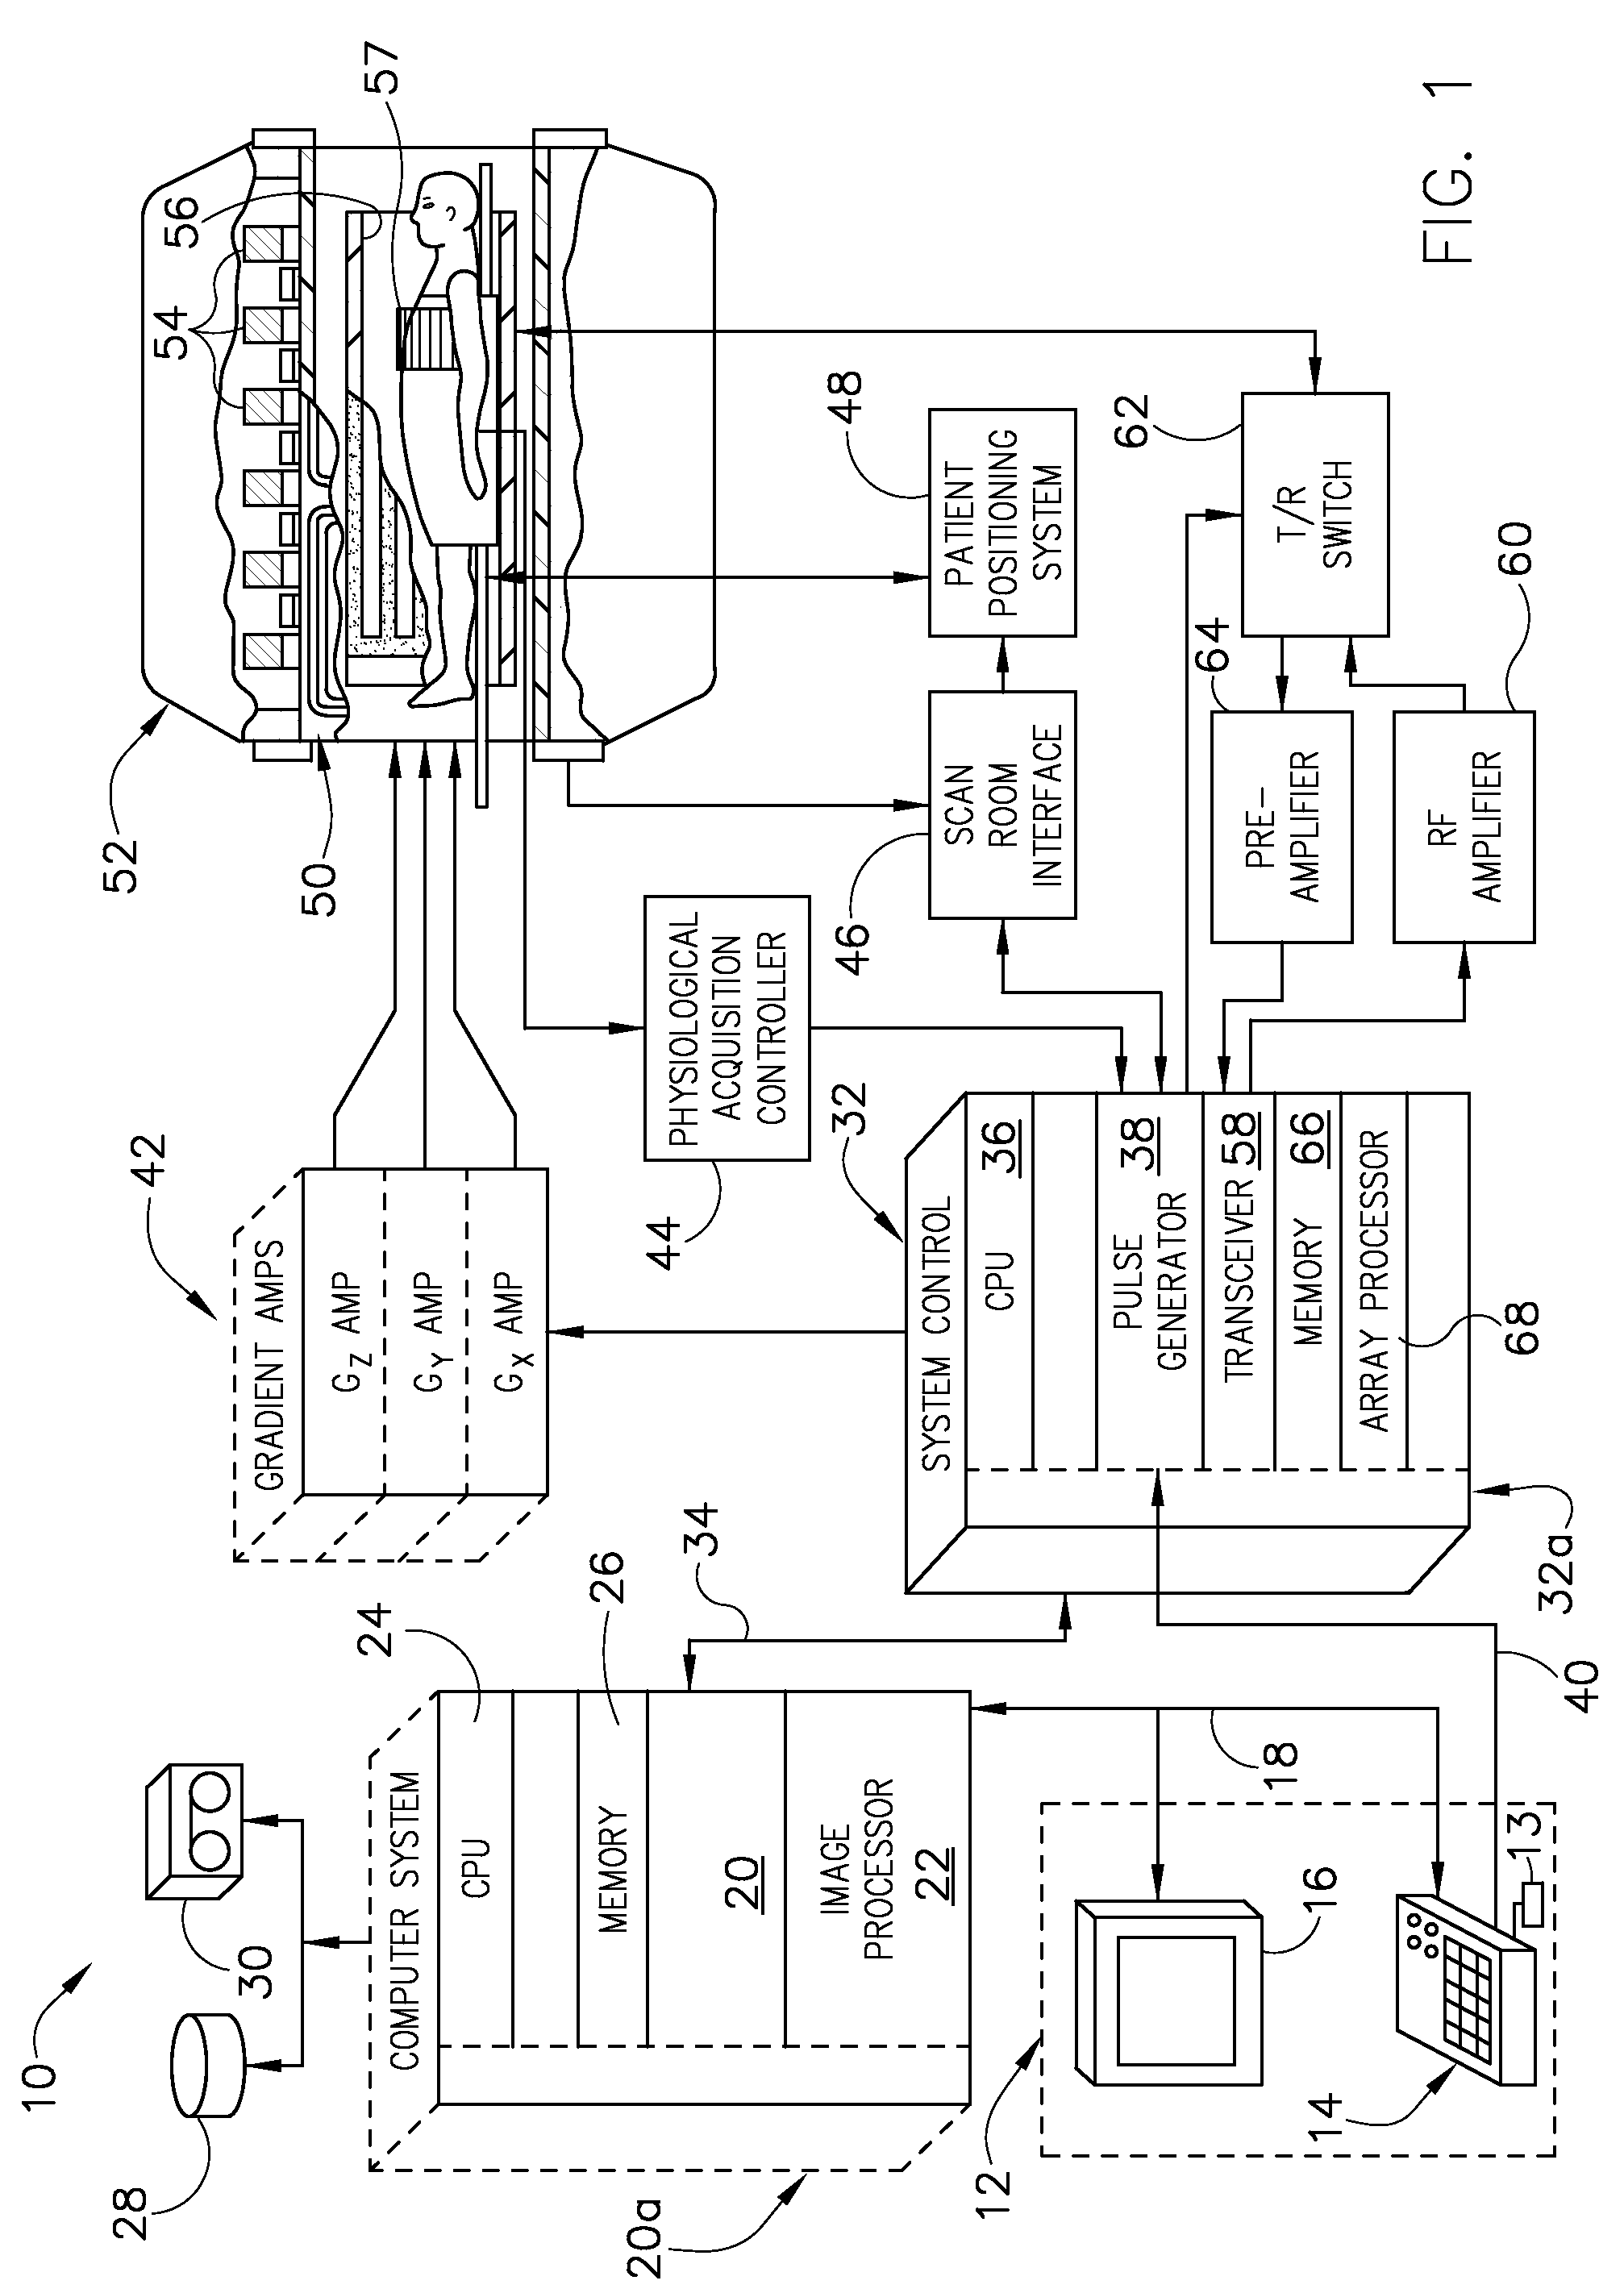 System and method for designing improved RF pulse profiles